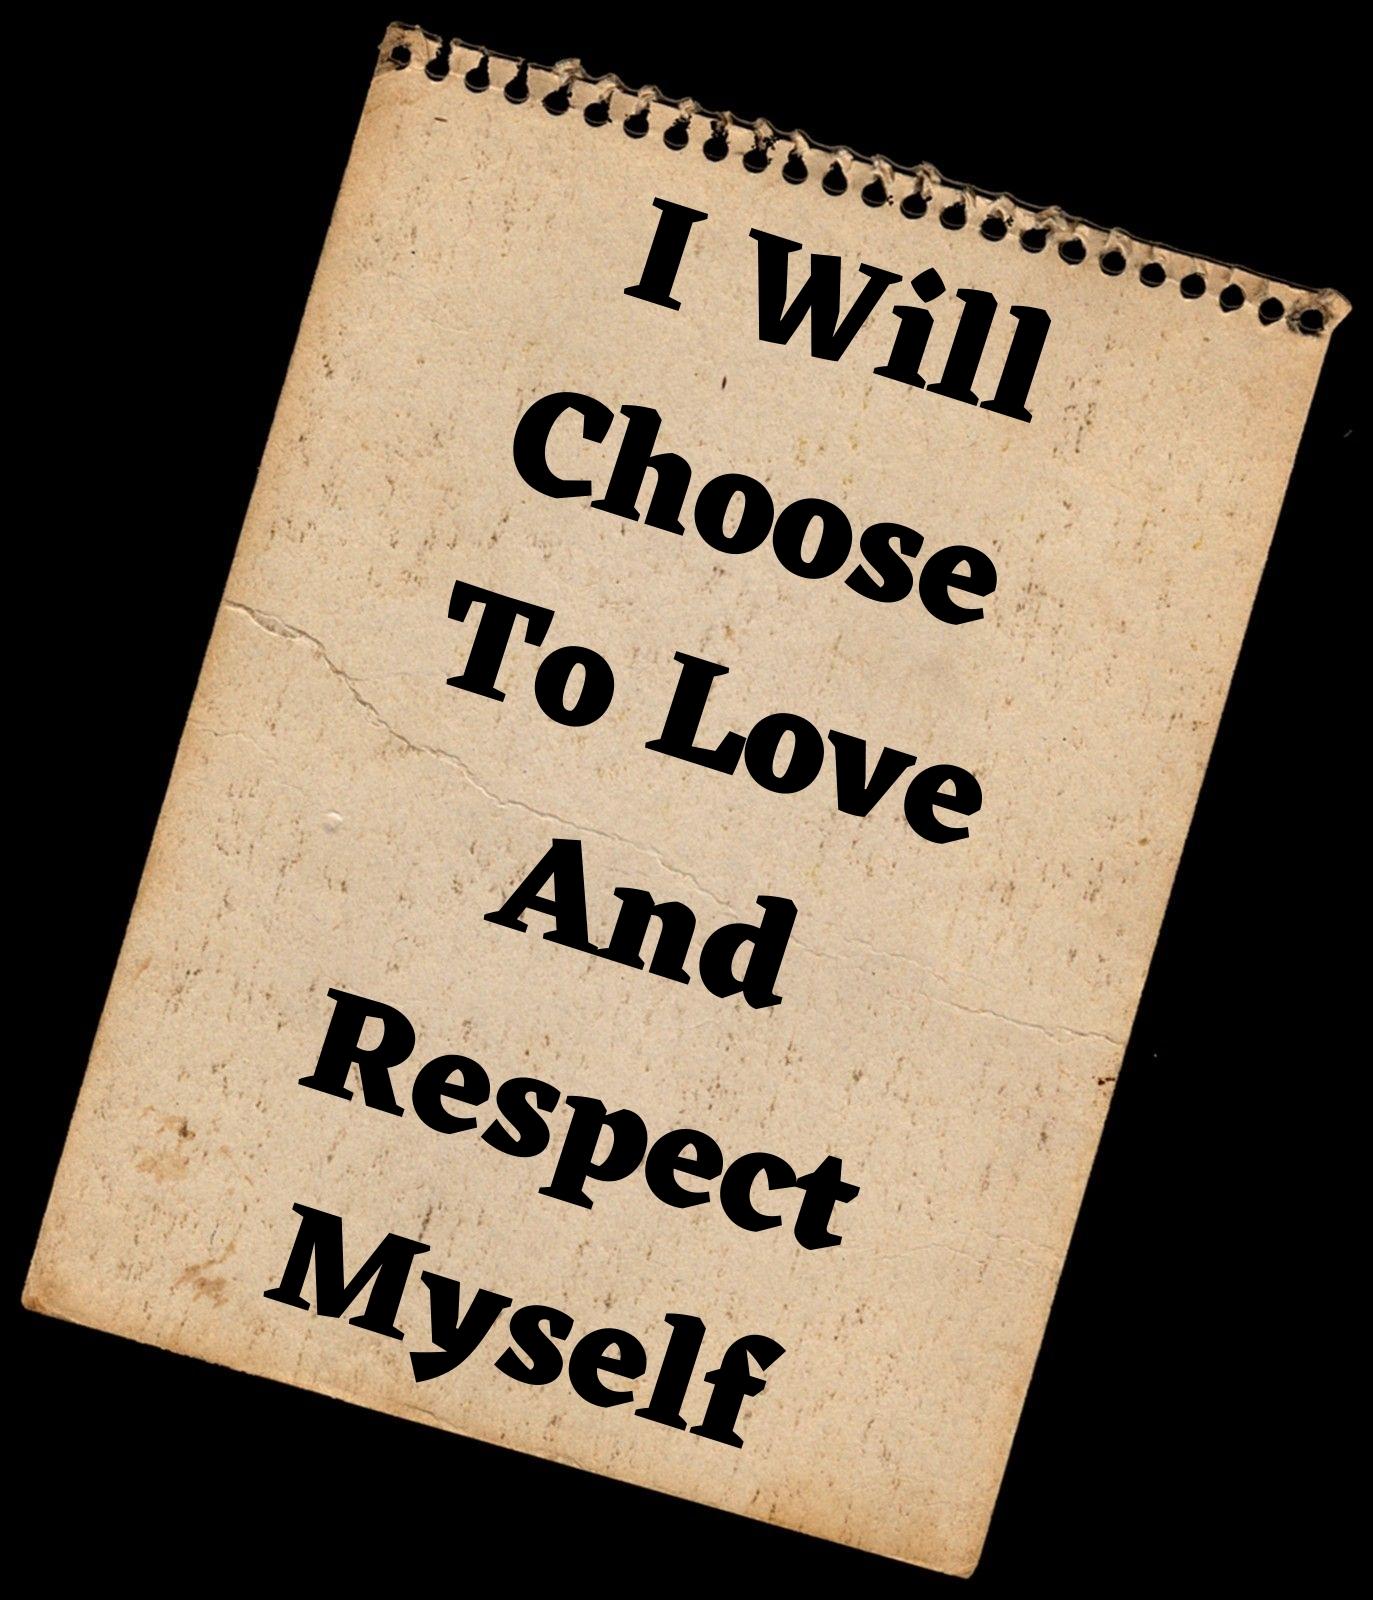  I WILL CHOOSE TO LOVE AND RESPECT MYSELF.